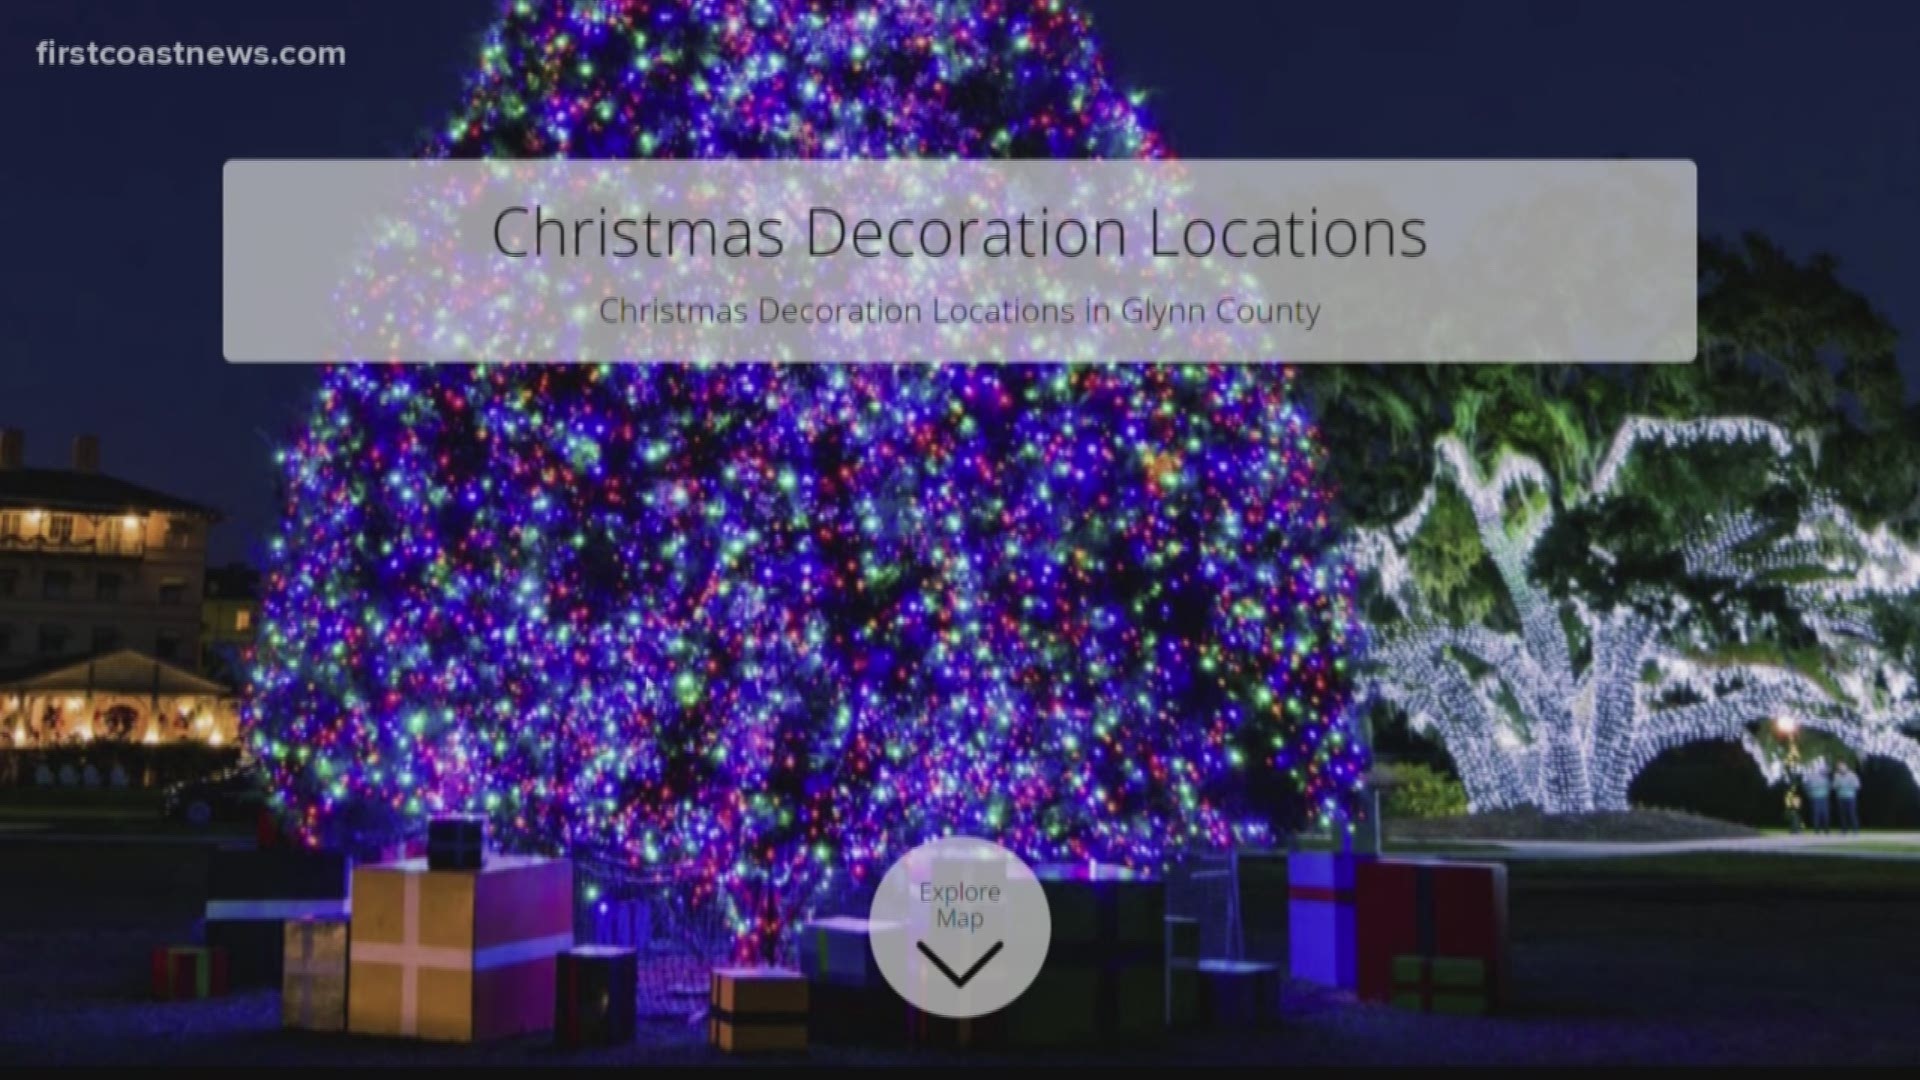 Glynn County residents can easily find places with Christmas Decorations set up thanks to a map created by the Geographic Information System Department.